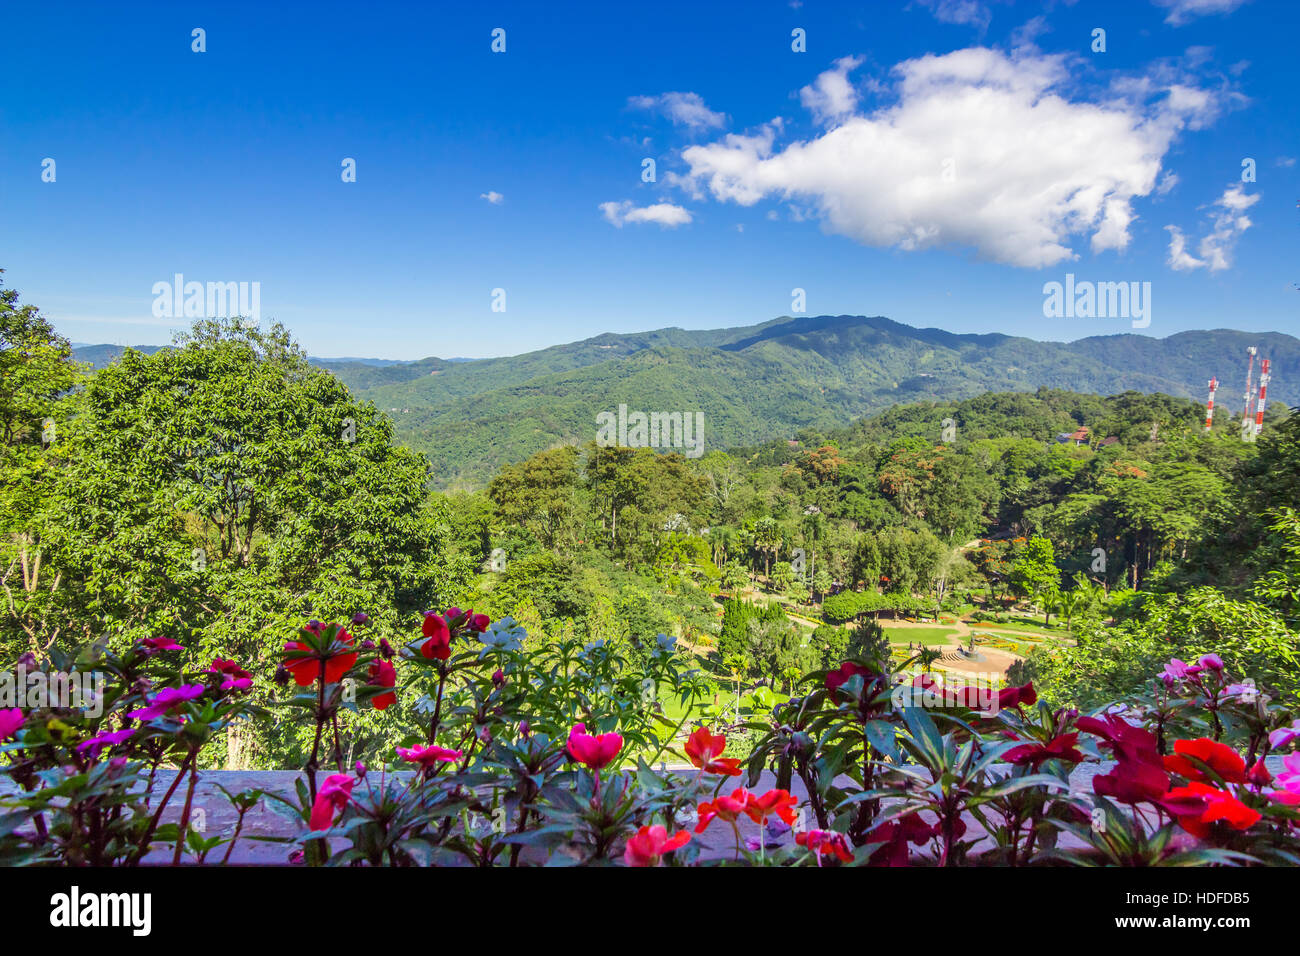 Flower bed forest mountain and blue sky background Stock Photo